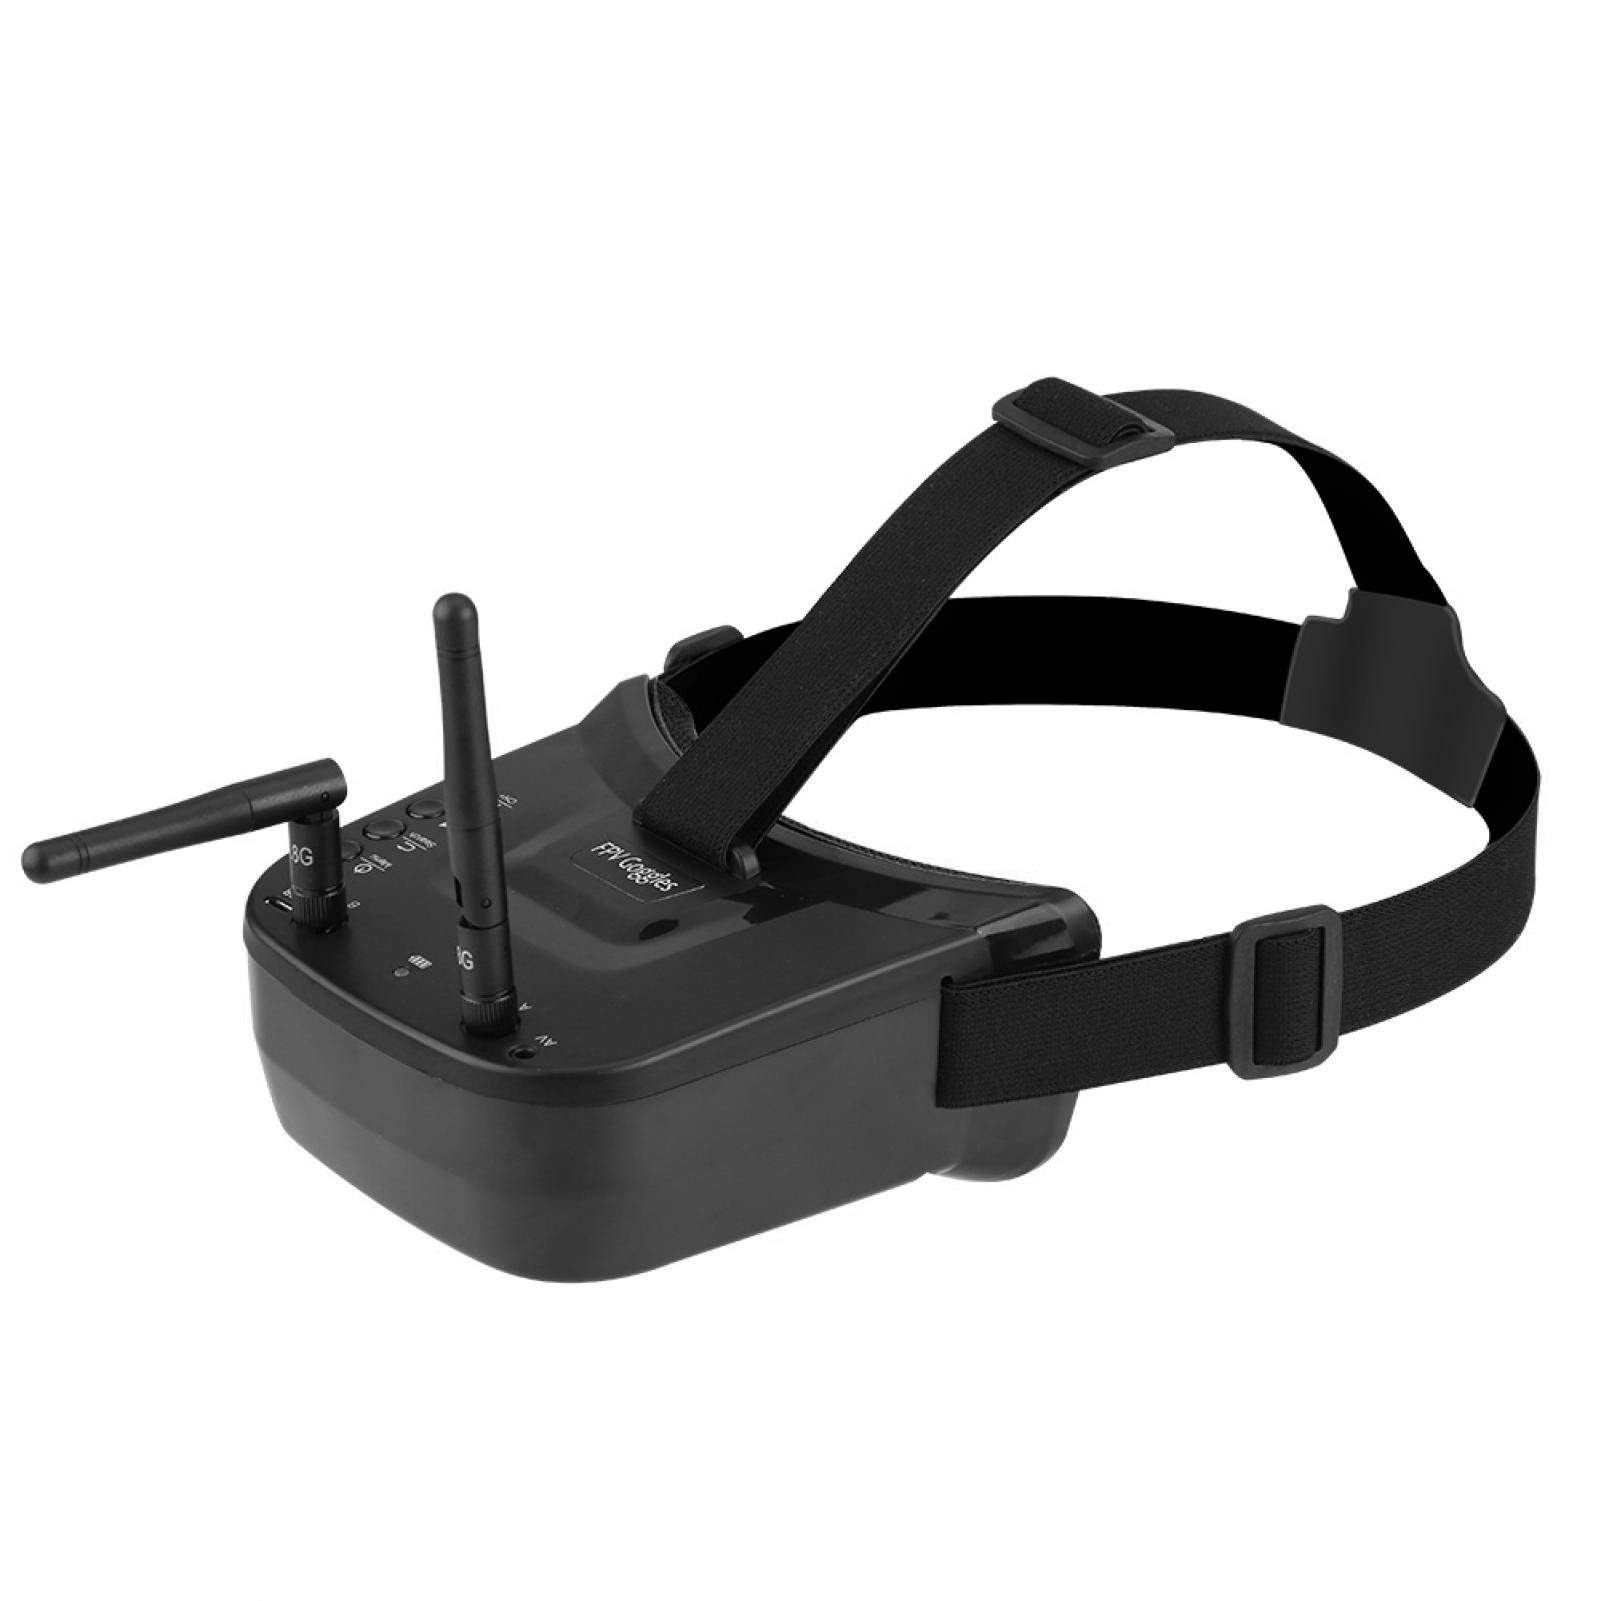 3" FPV Goggles with Long Battery Life